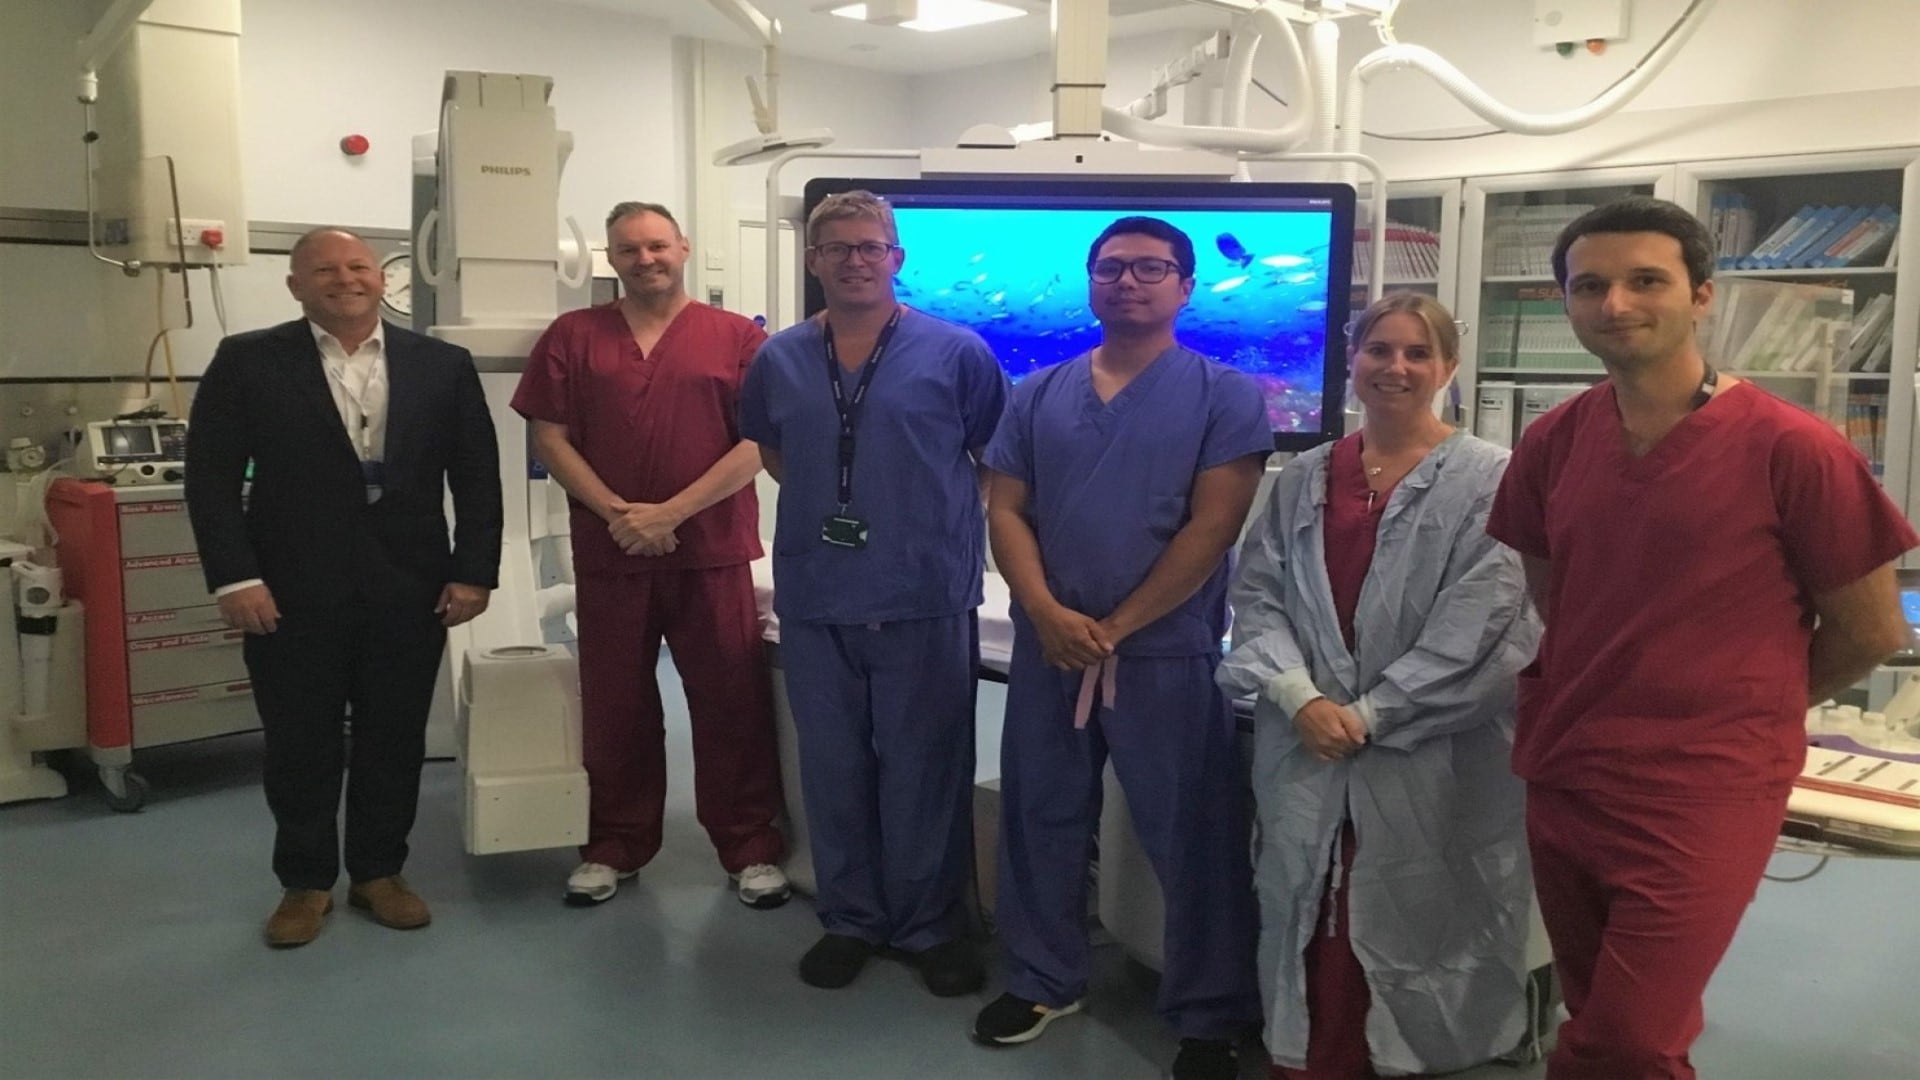 University Hospitals Sussex and Philips set to improve the diagnosis of heart disease with new Cardiac Catheter Laboratories this World Heart Day